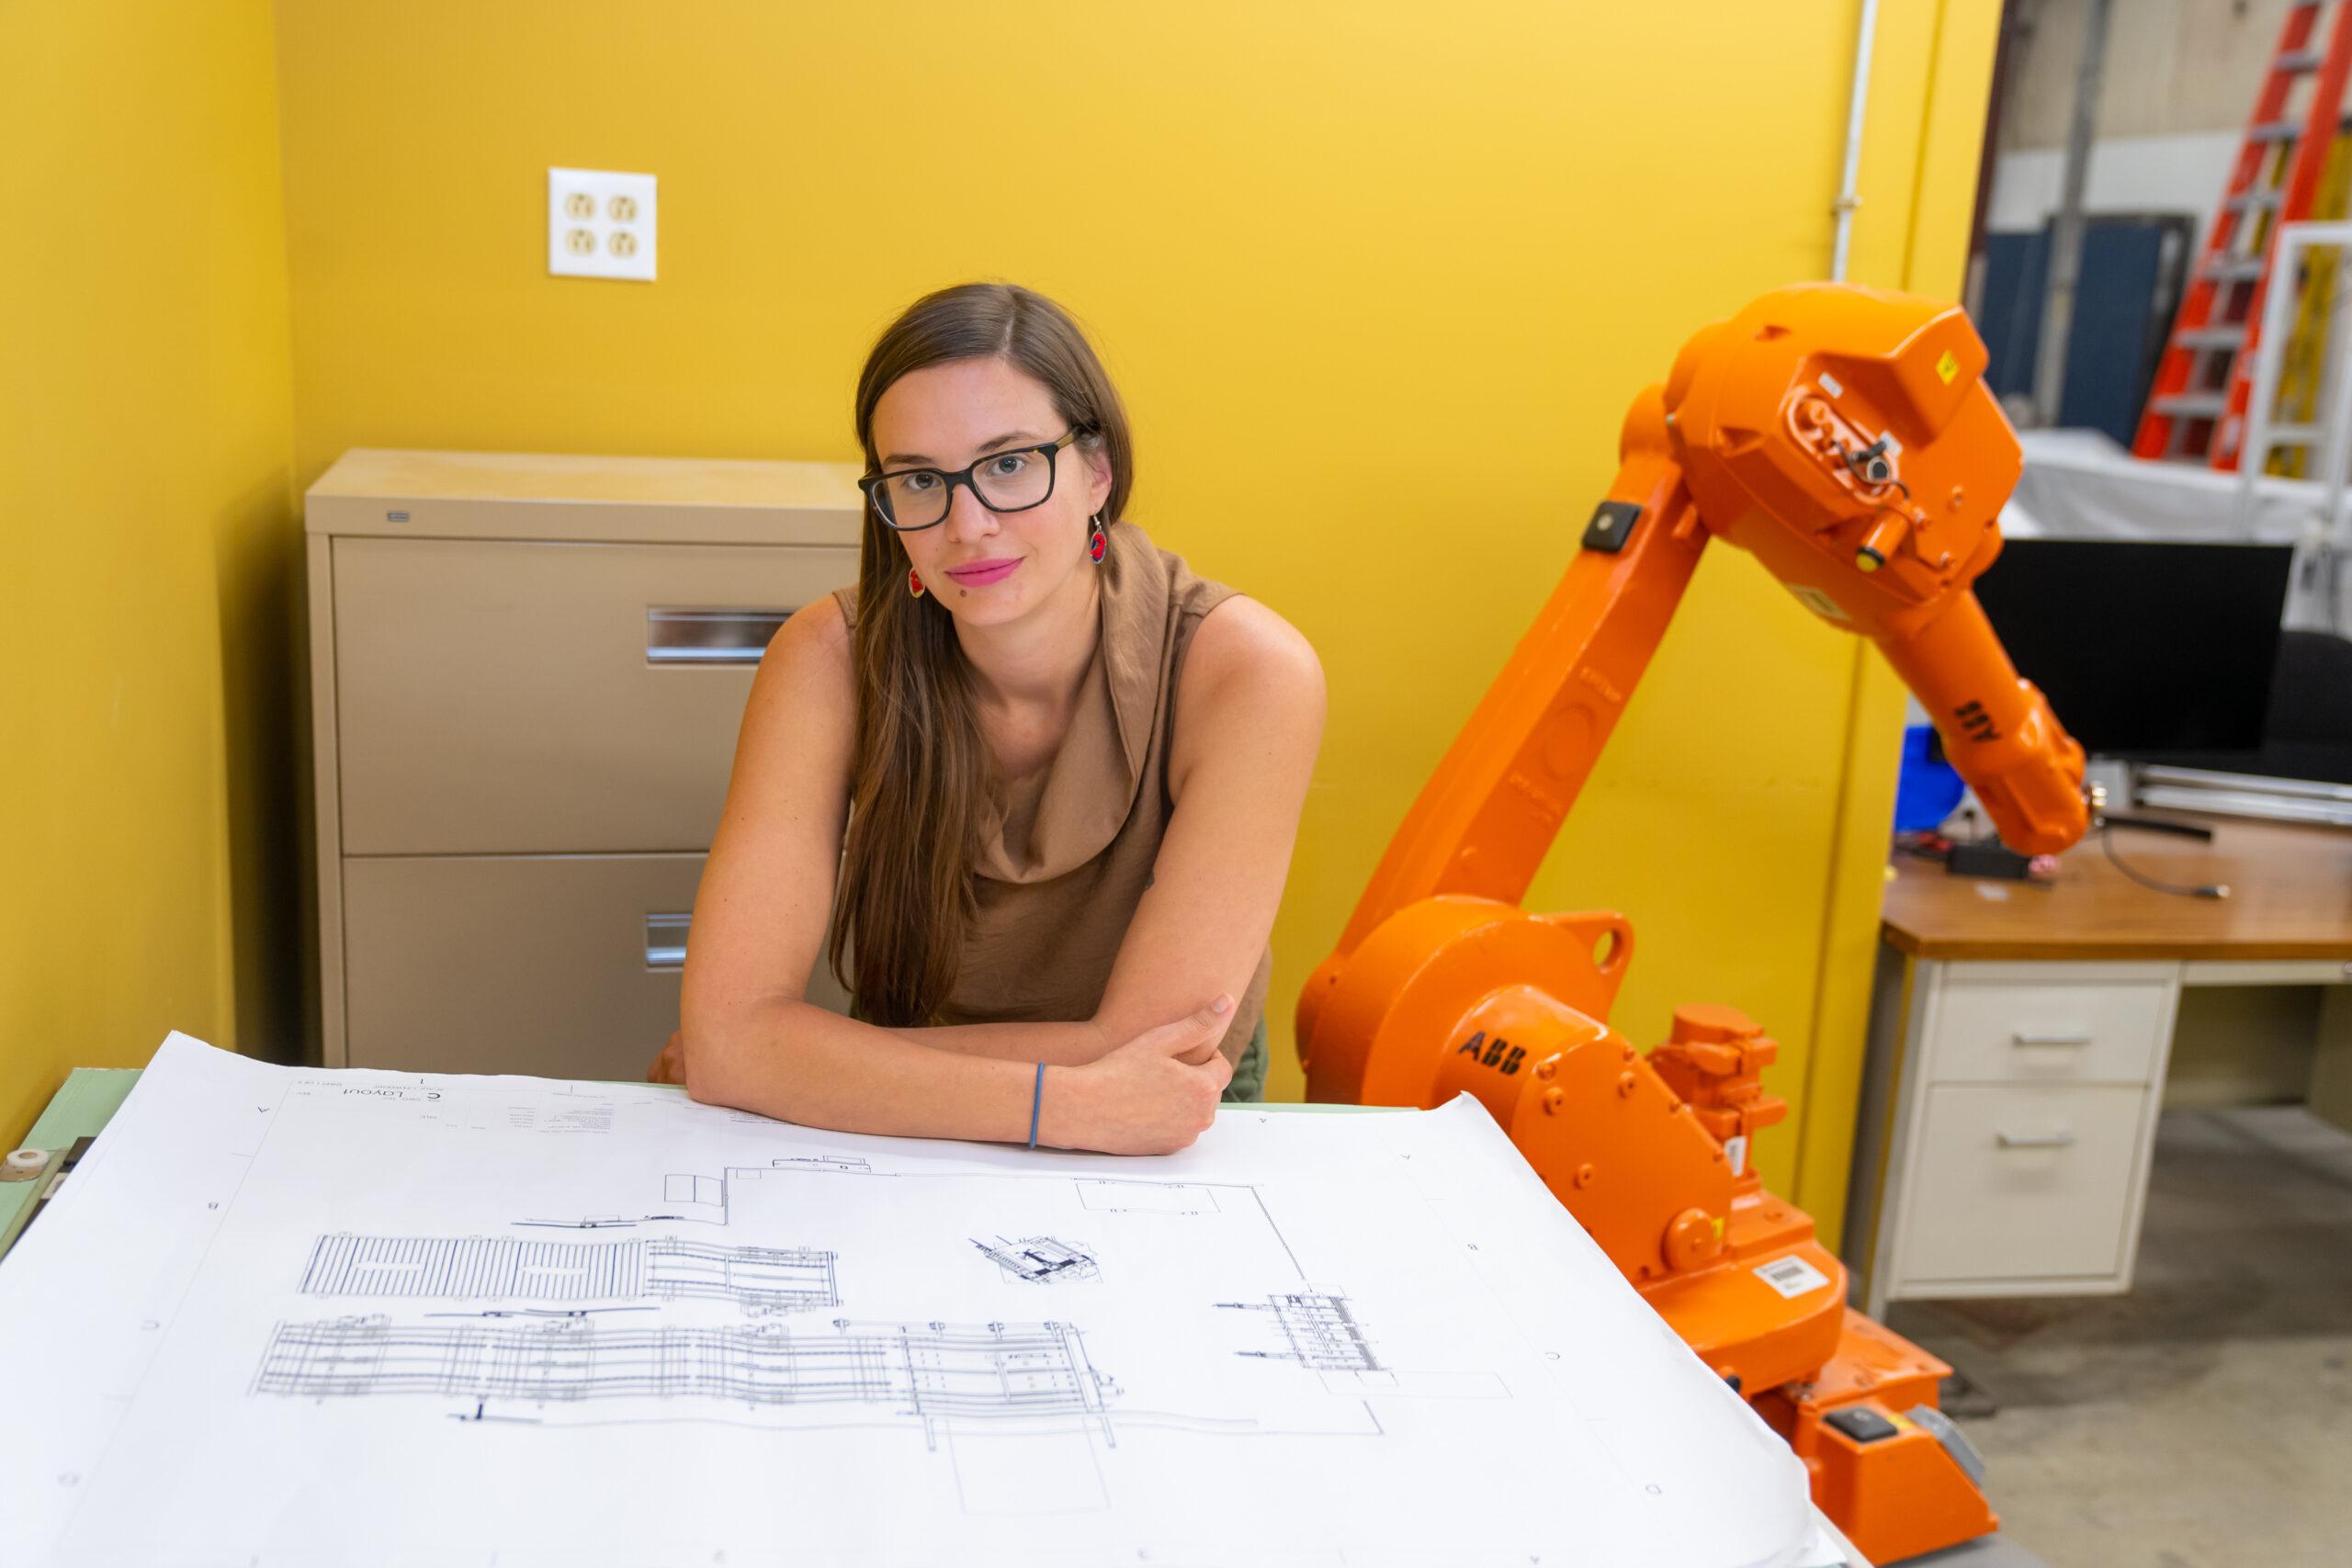 Rigorous COO showing manufacturing plant blueprint with robot behind her.